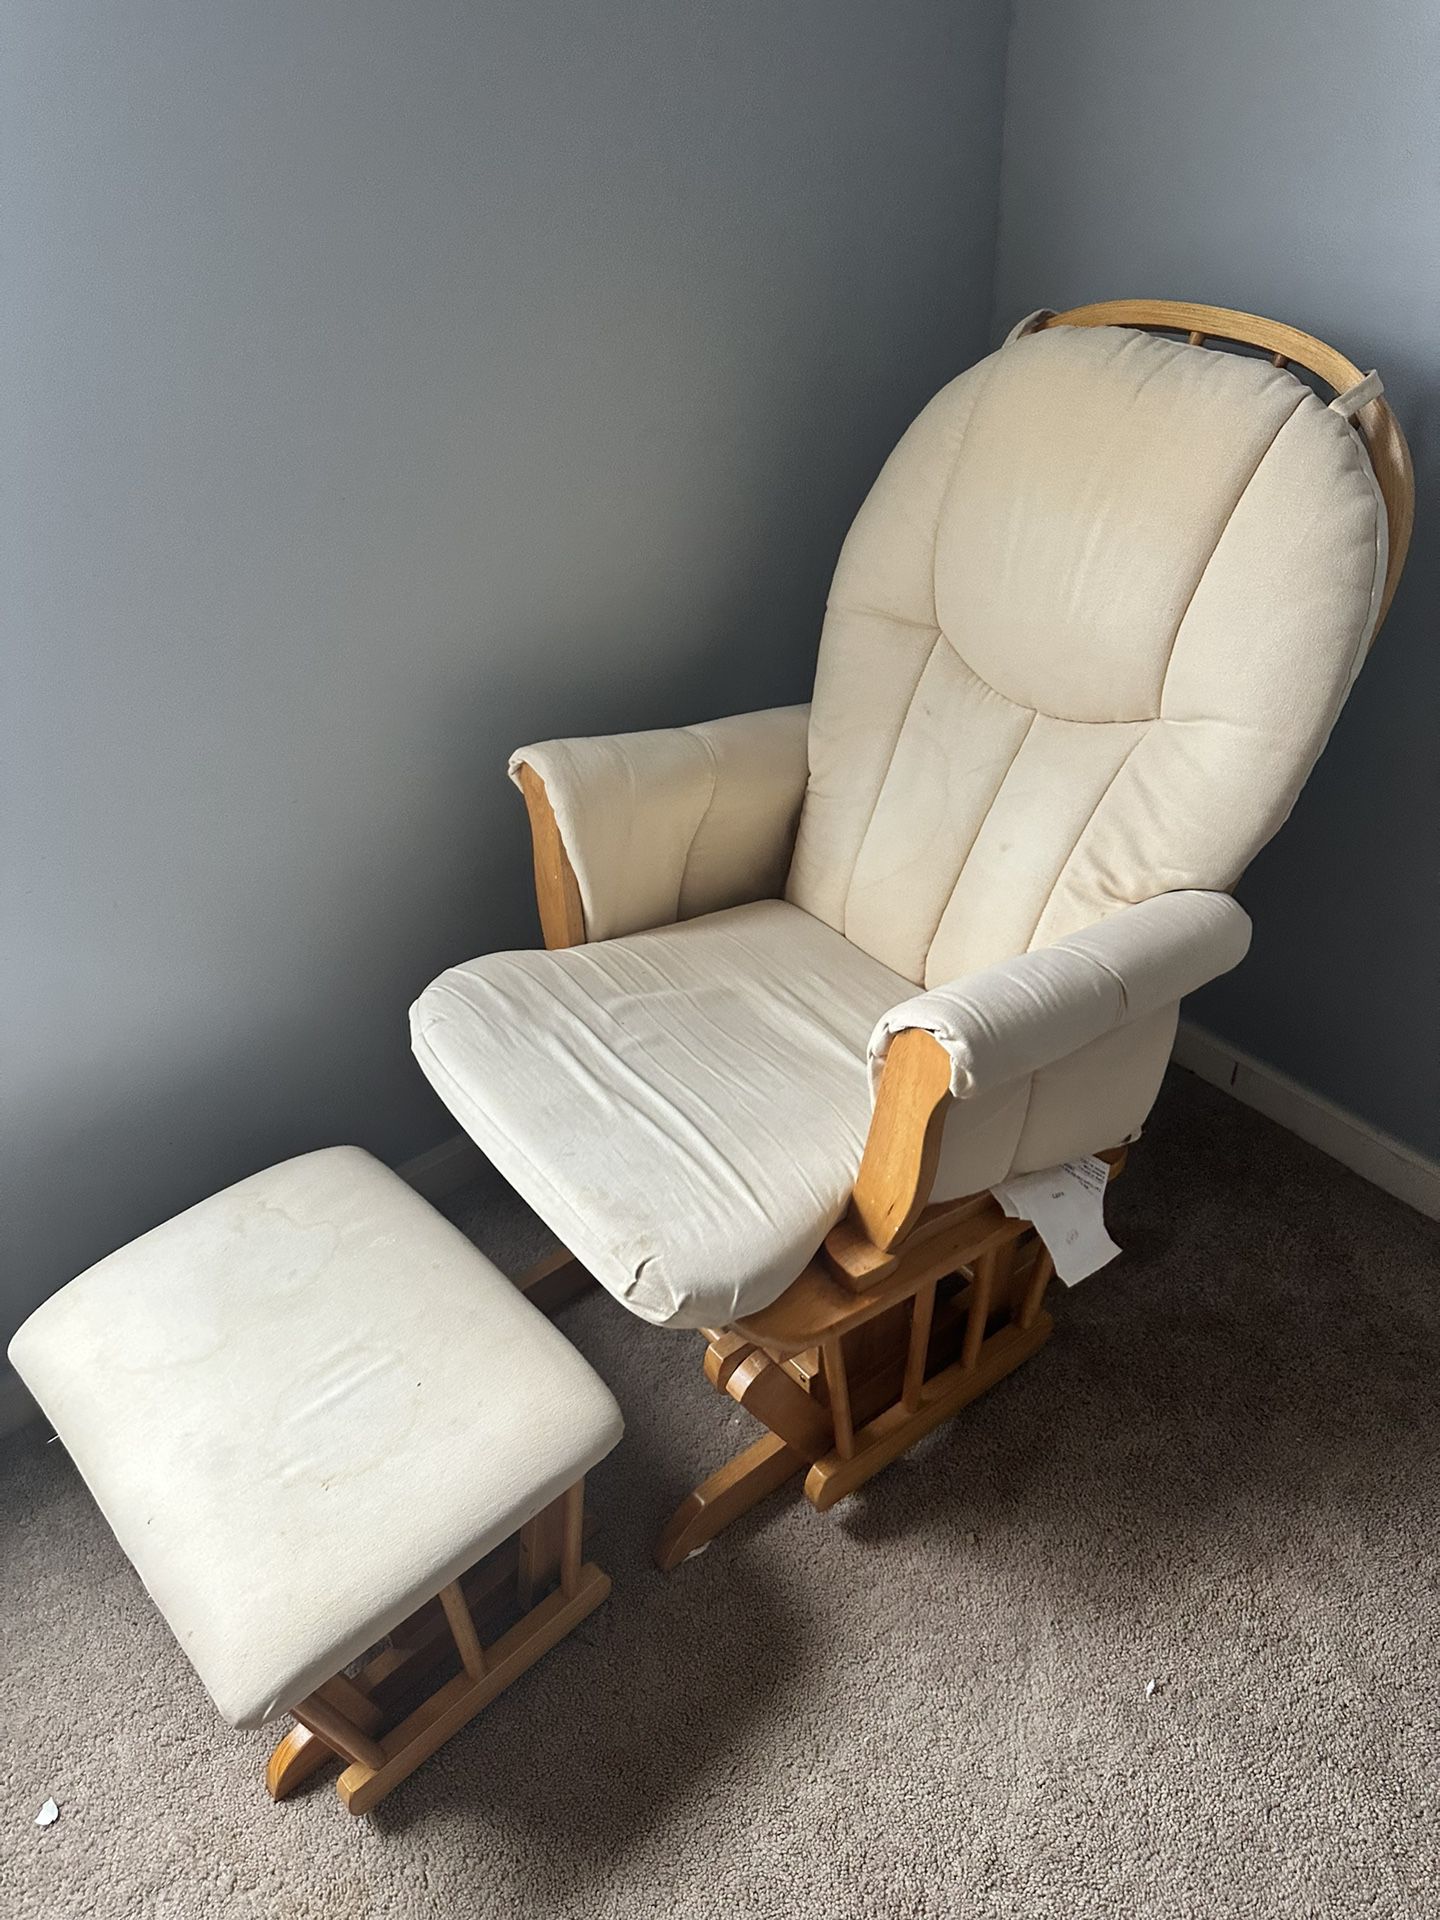 Mom’s Rocking Chair And Changing Table